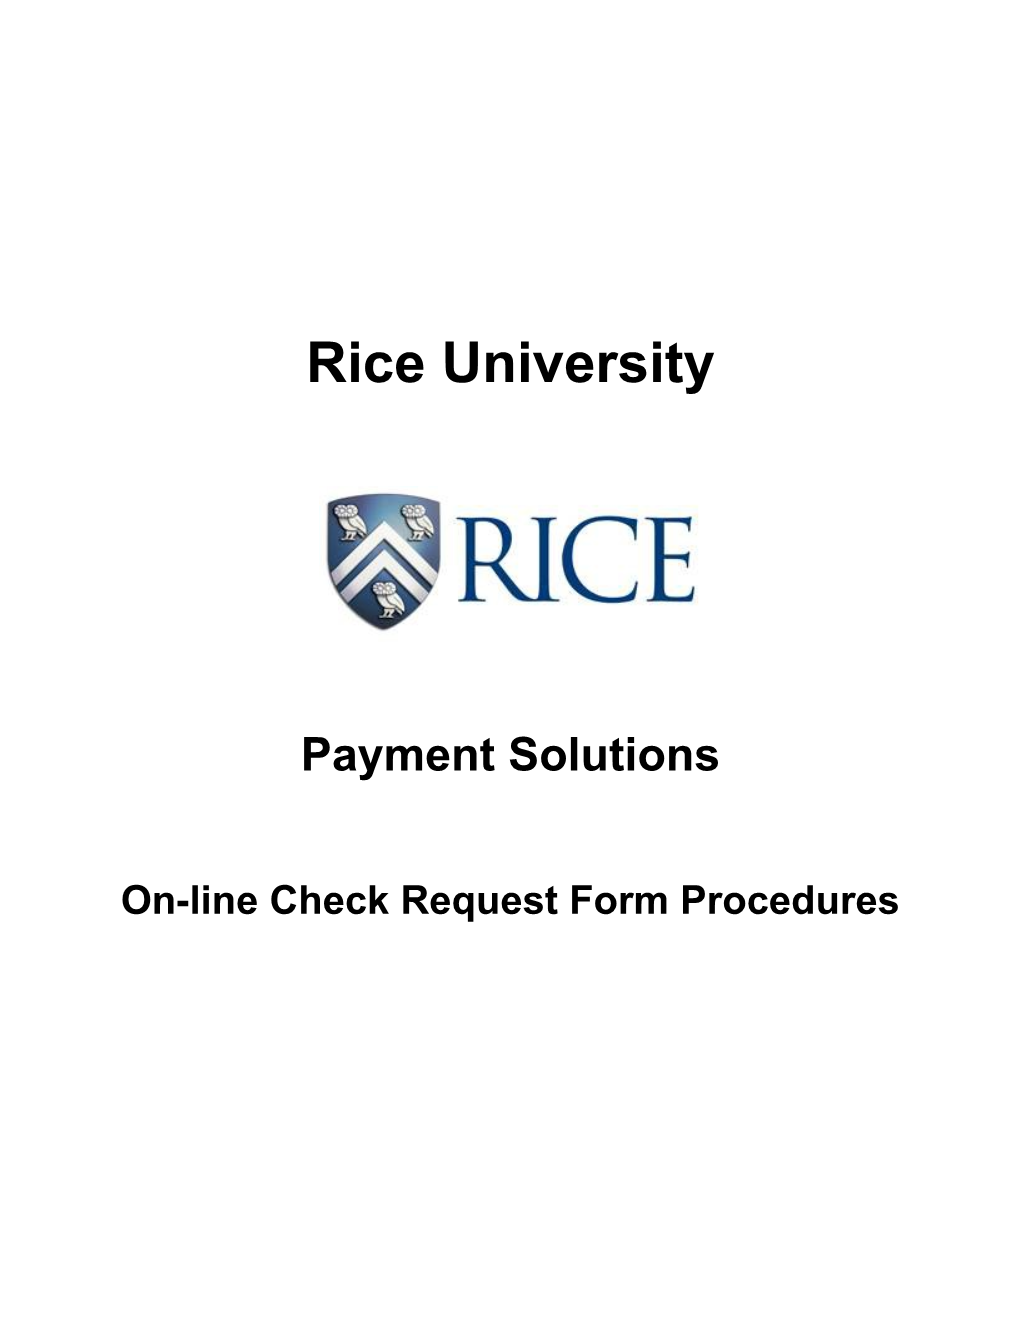 On-Line Check Request Form Procedures